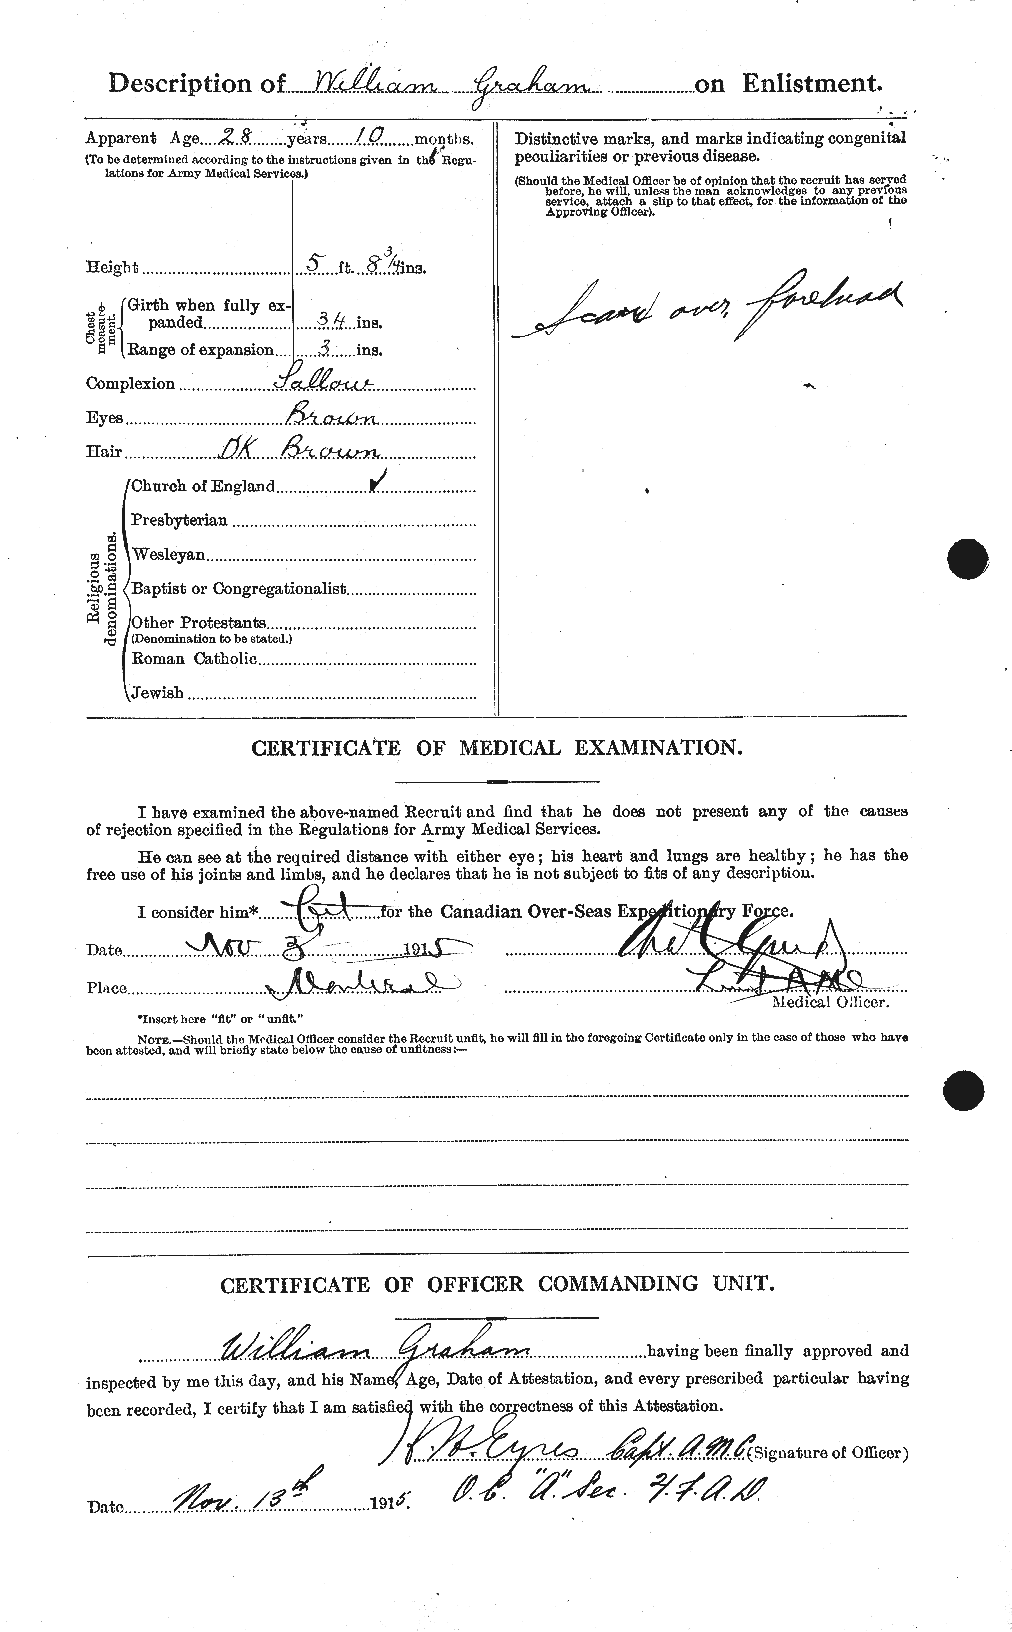 Personnel Records of the First World War - CEF 362712b